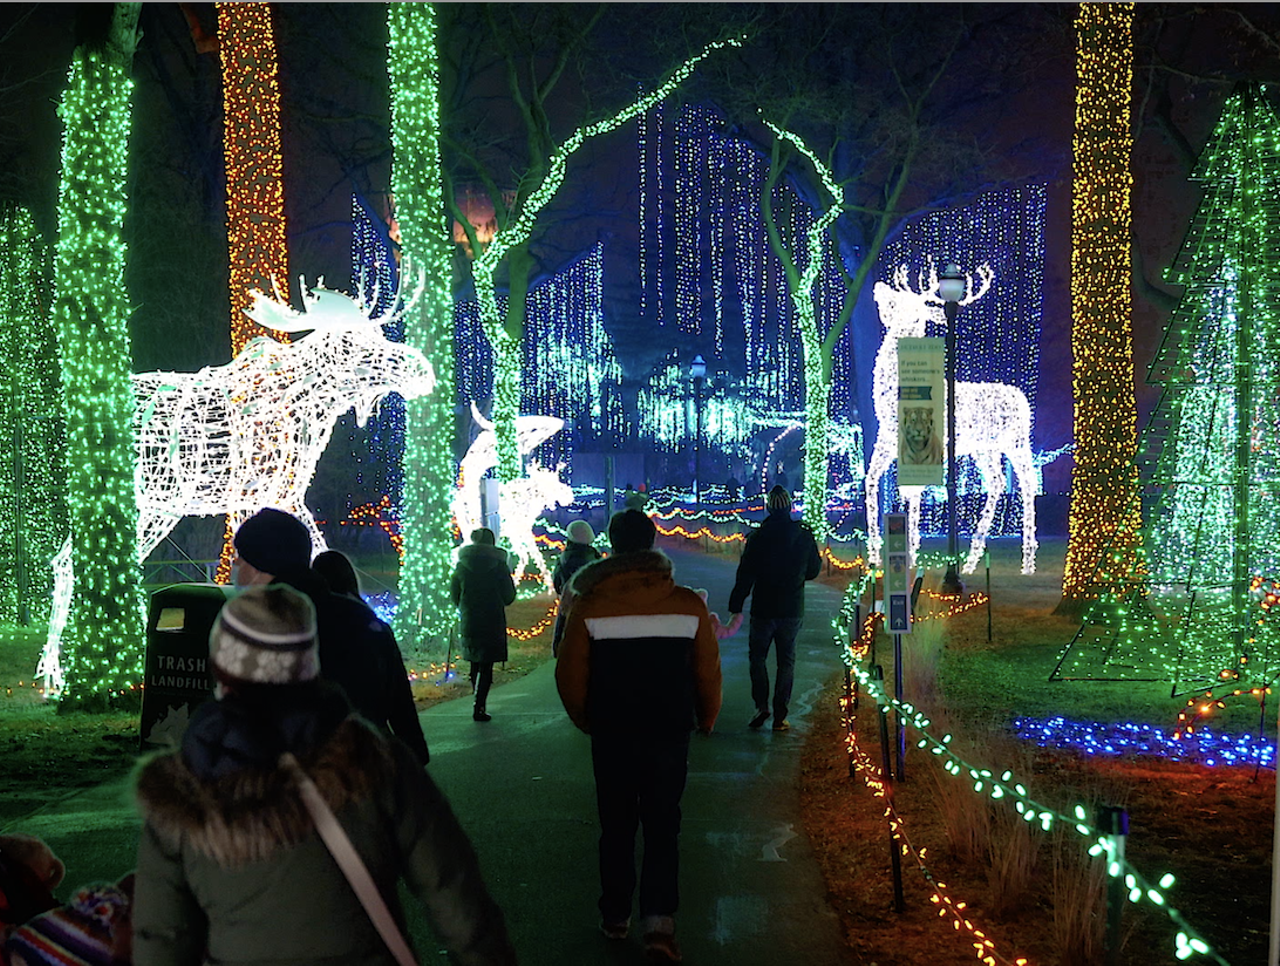 Wild Lights at the Detroit Zoo
Bundle up for the Detroit Zoo’s annual holiday light show with nearly 500 displays of LED lights covering trees, buildings, and sculptures. While you probably won’t see any actual animals, there are tons of light-up animal sculptures to enjoy. Plus, you can visit Wild Lights Lodge for live entertainment, smores, and more. Wild Lights runs through early January on weekends and select weeknights. 